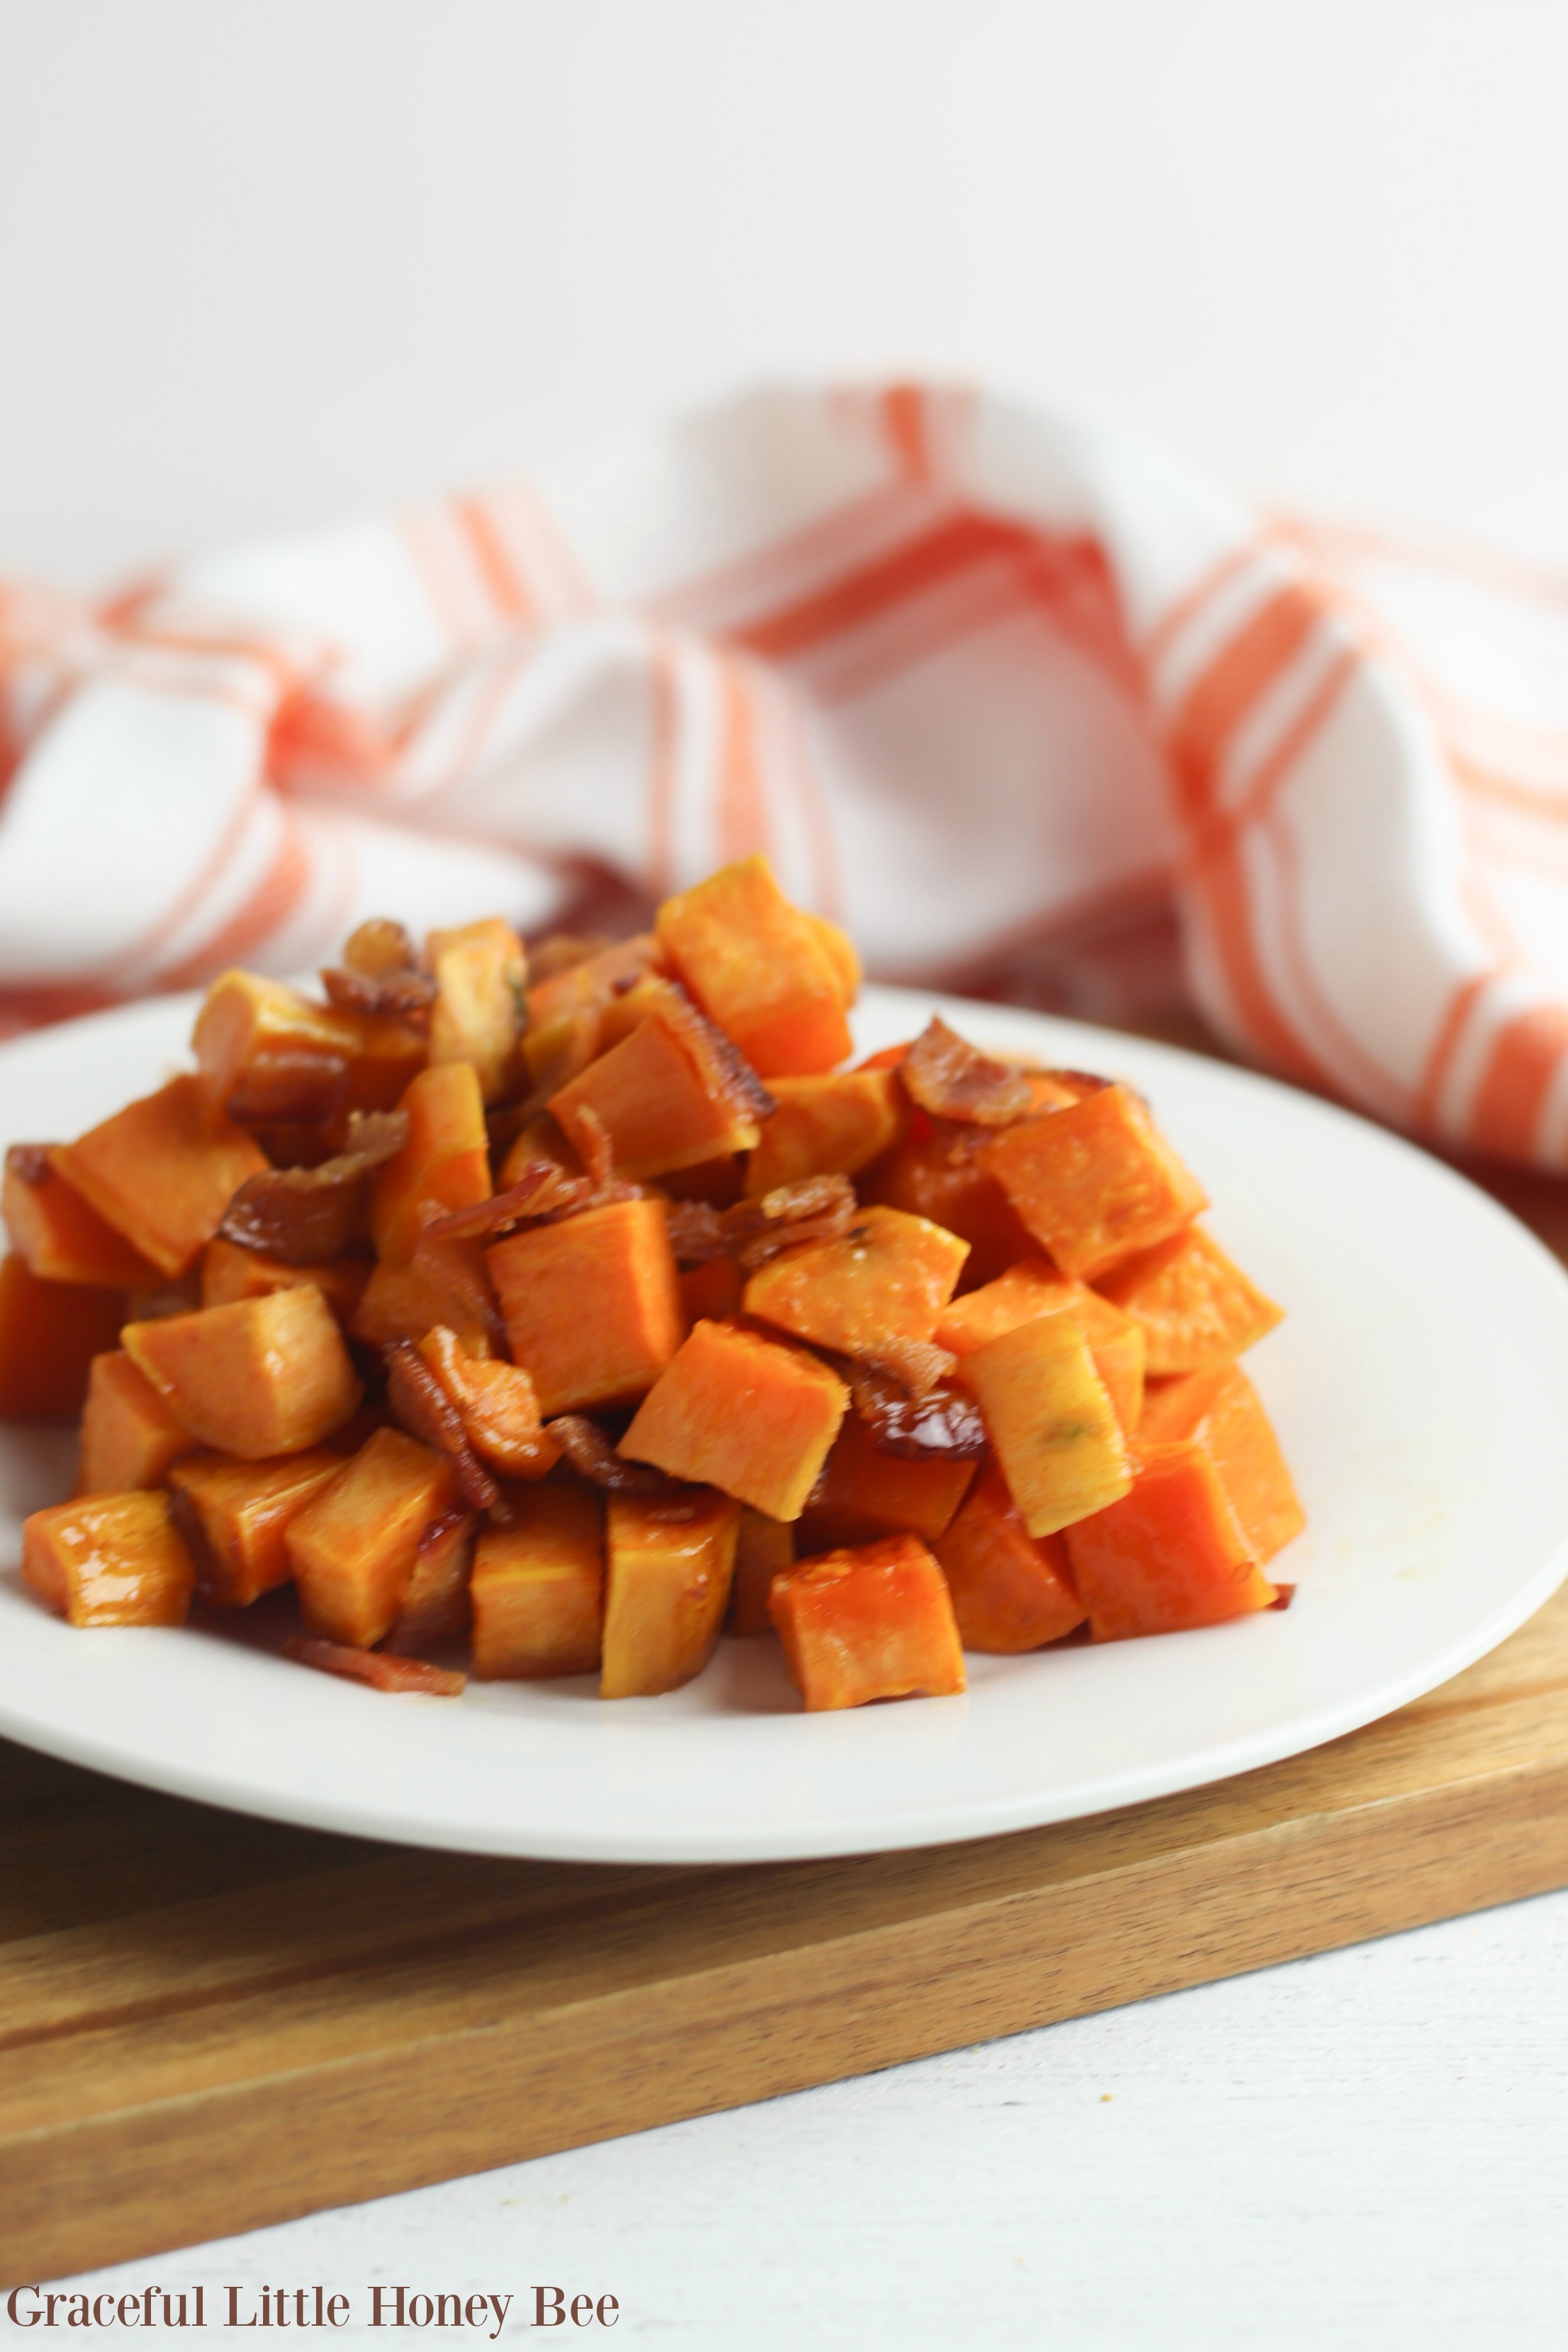 Oven-roasted sweet potatoes and bacon on a white plate.